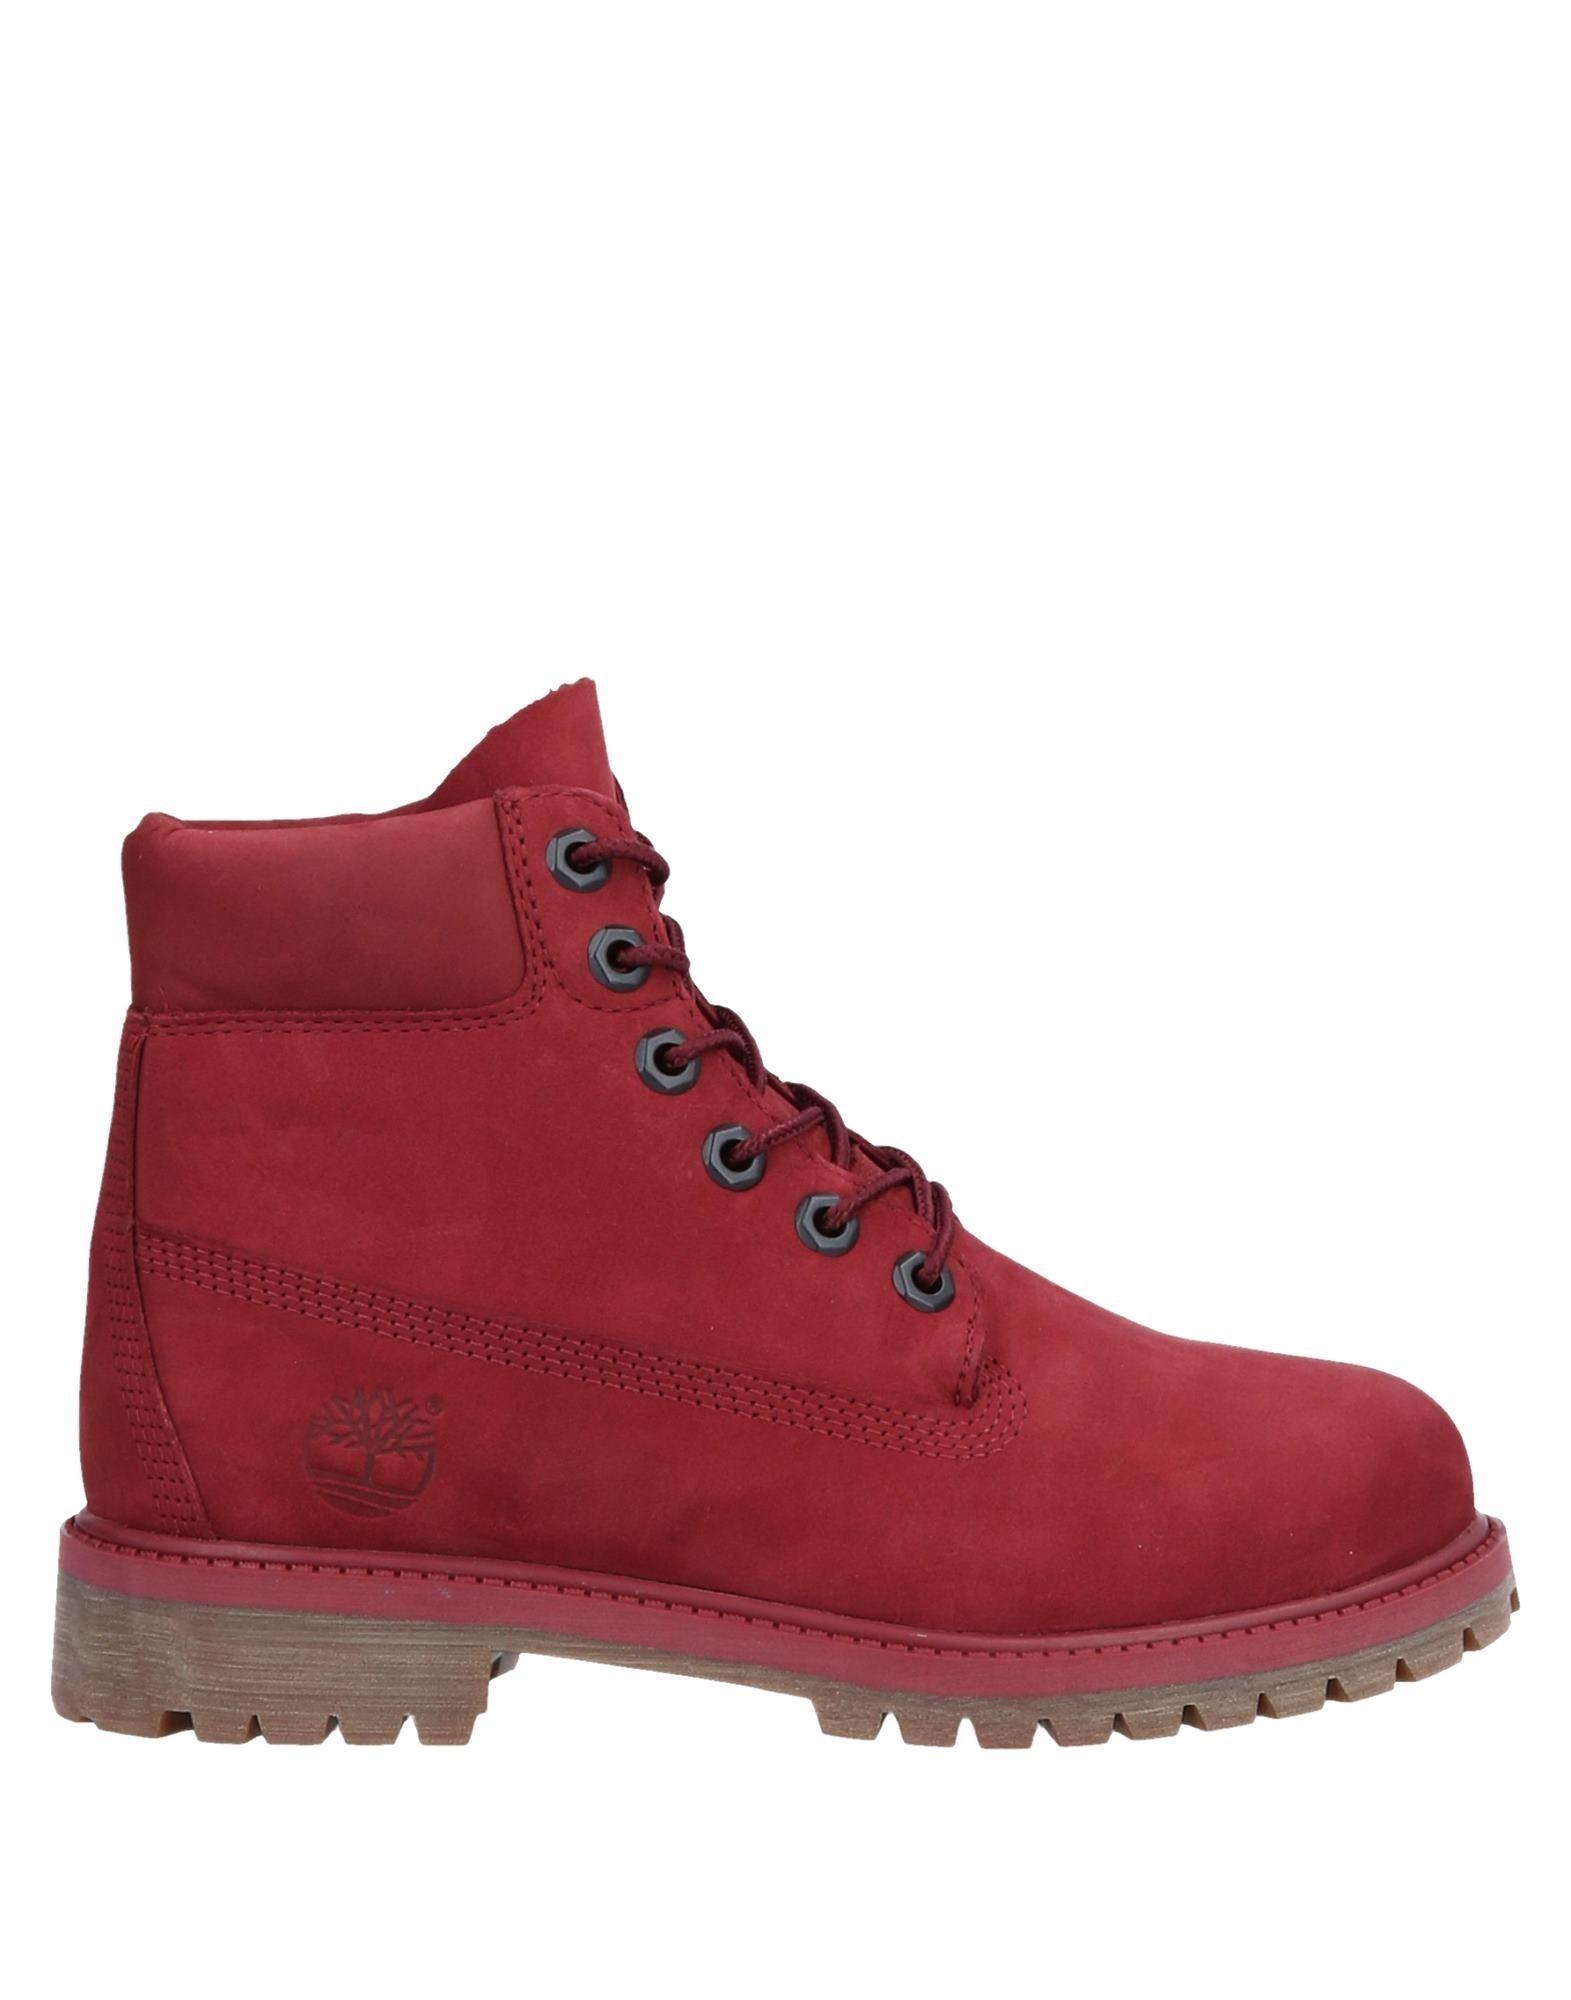 Timberland Rubber Ankle Boots in Brick Red (Red) - Lyst